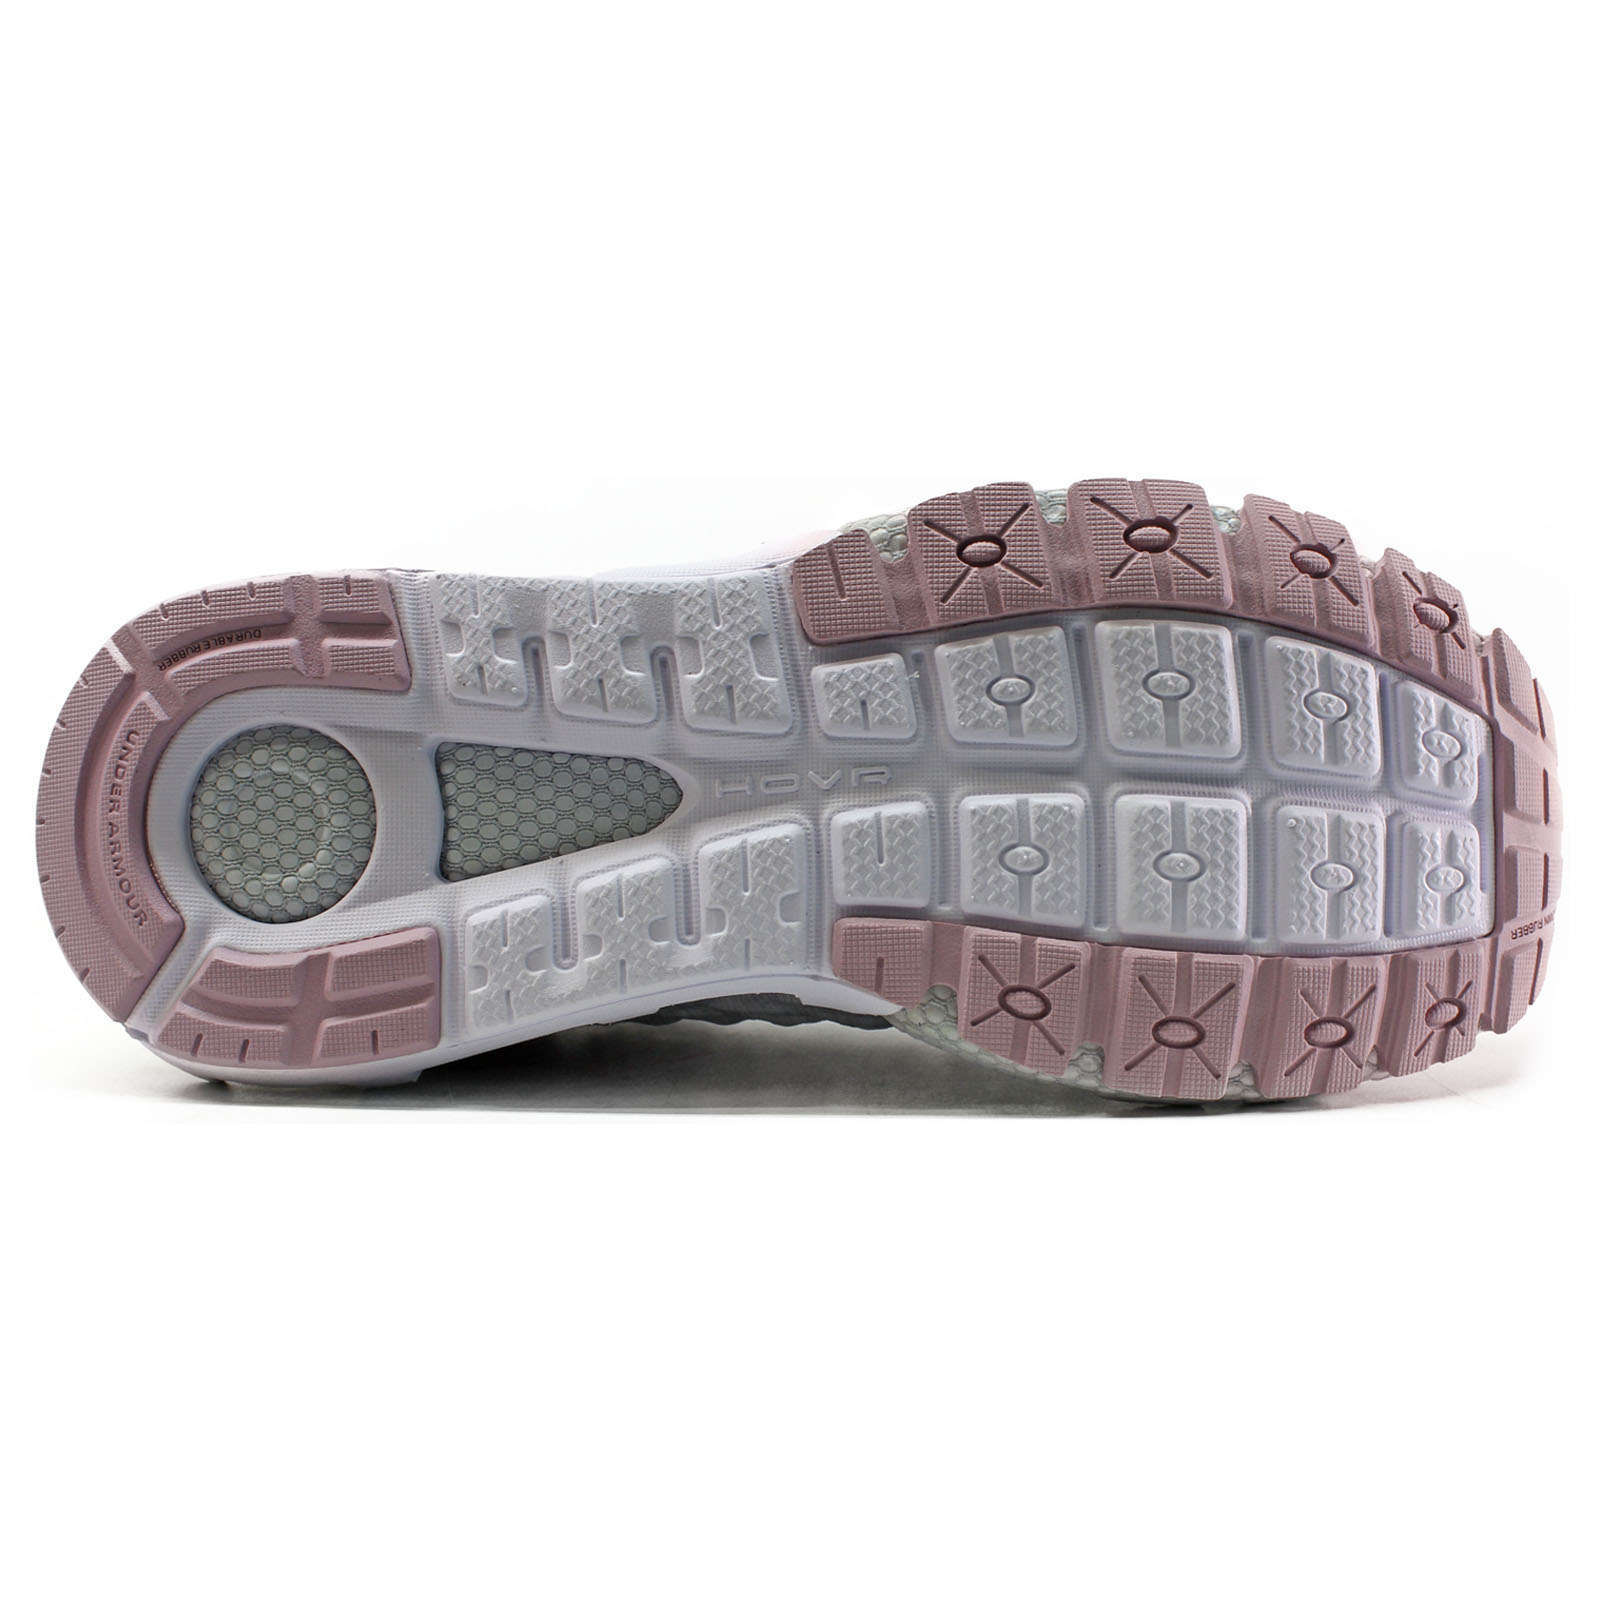 Under Armour HOVR Mega 2 Clone Synthetic Textile Women's Low-Top Sneakers#color_grey pink